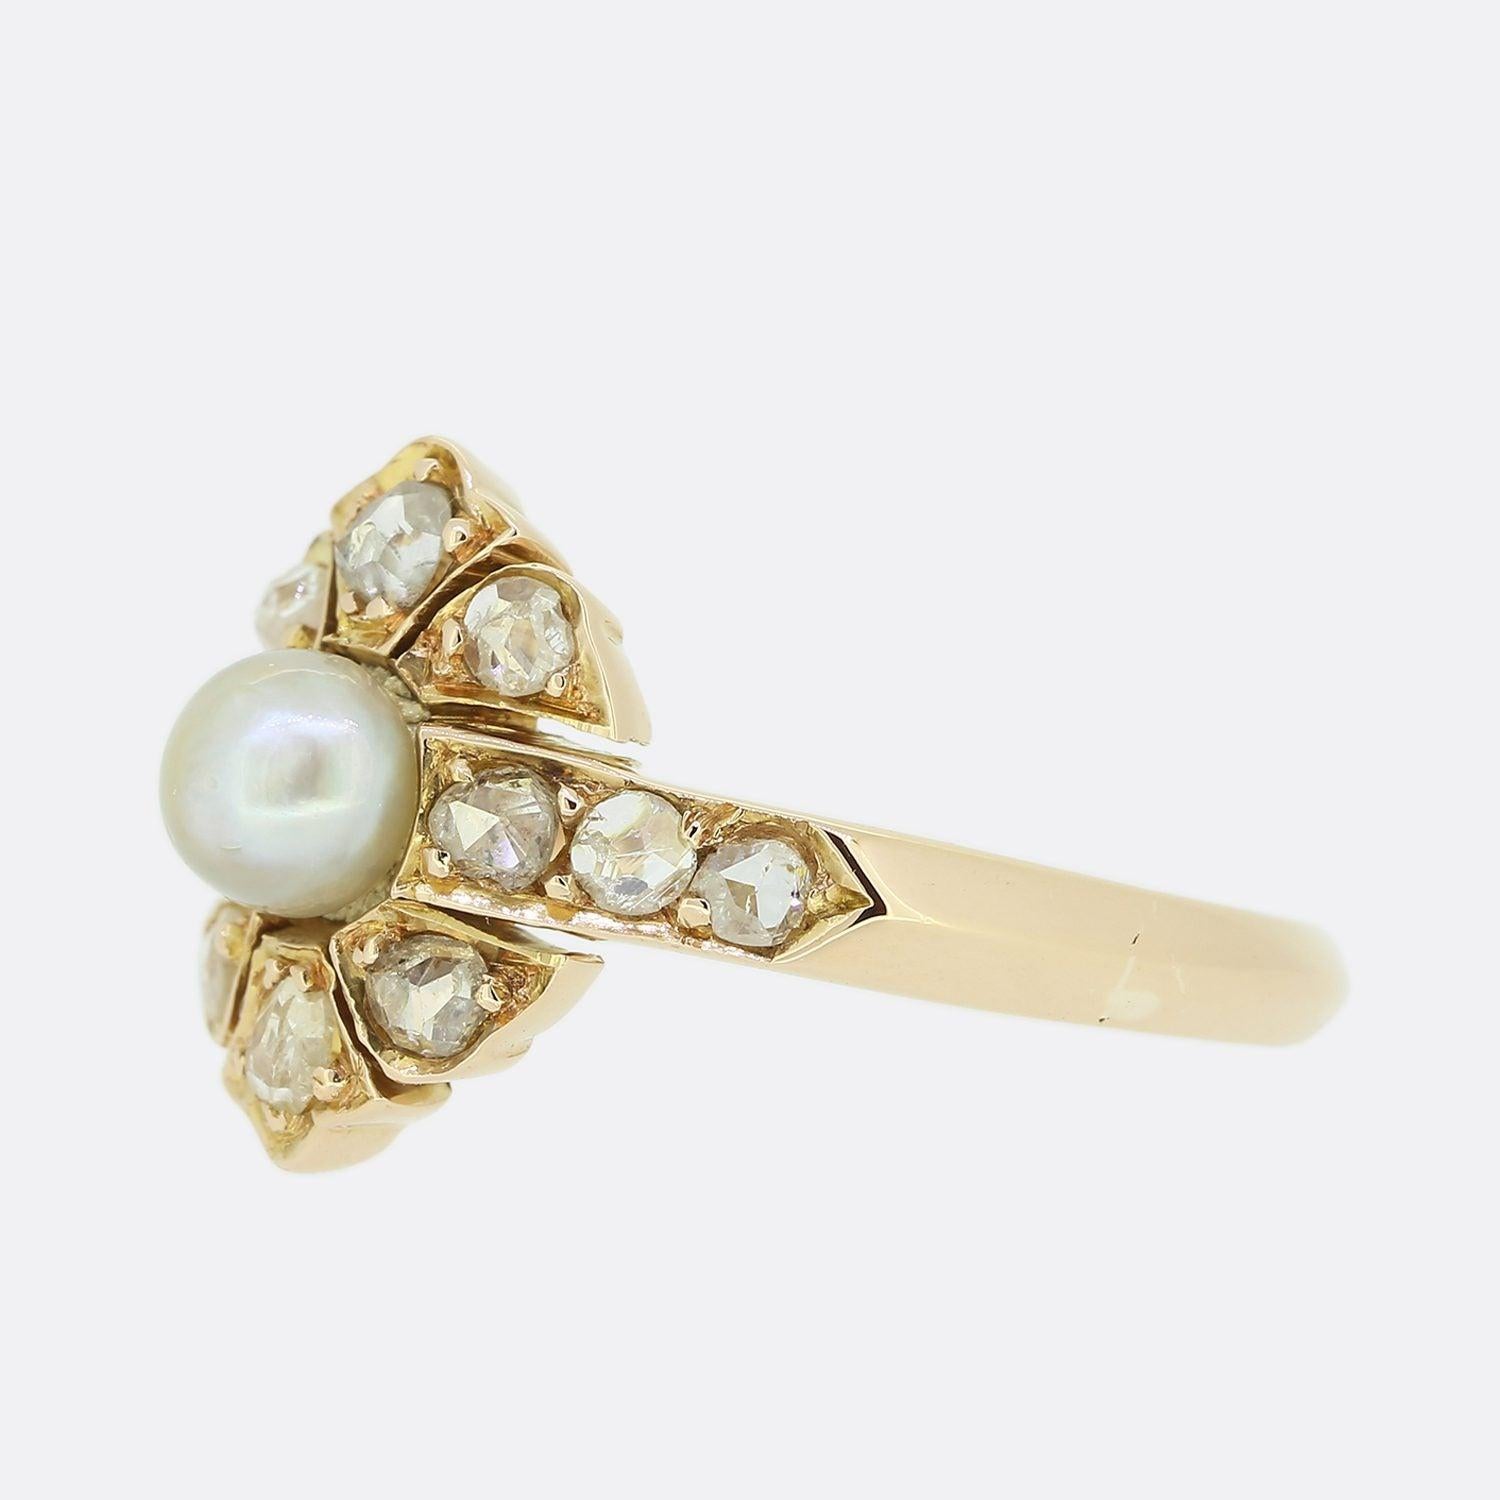 This is a wonderful 18ct yellow gold pearl and diamond cluster ring. The central pearl is natural and has a nice lustre and the diamonds are bright white sparkling rose cuts.

Condition: Used (Very Good)
Weight: 2.7 grams
UK Ring Size: J
Face